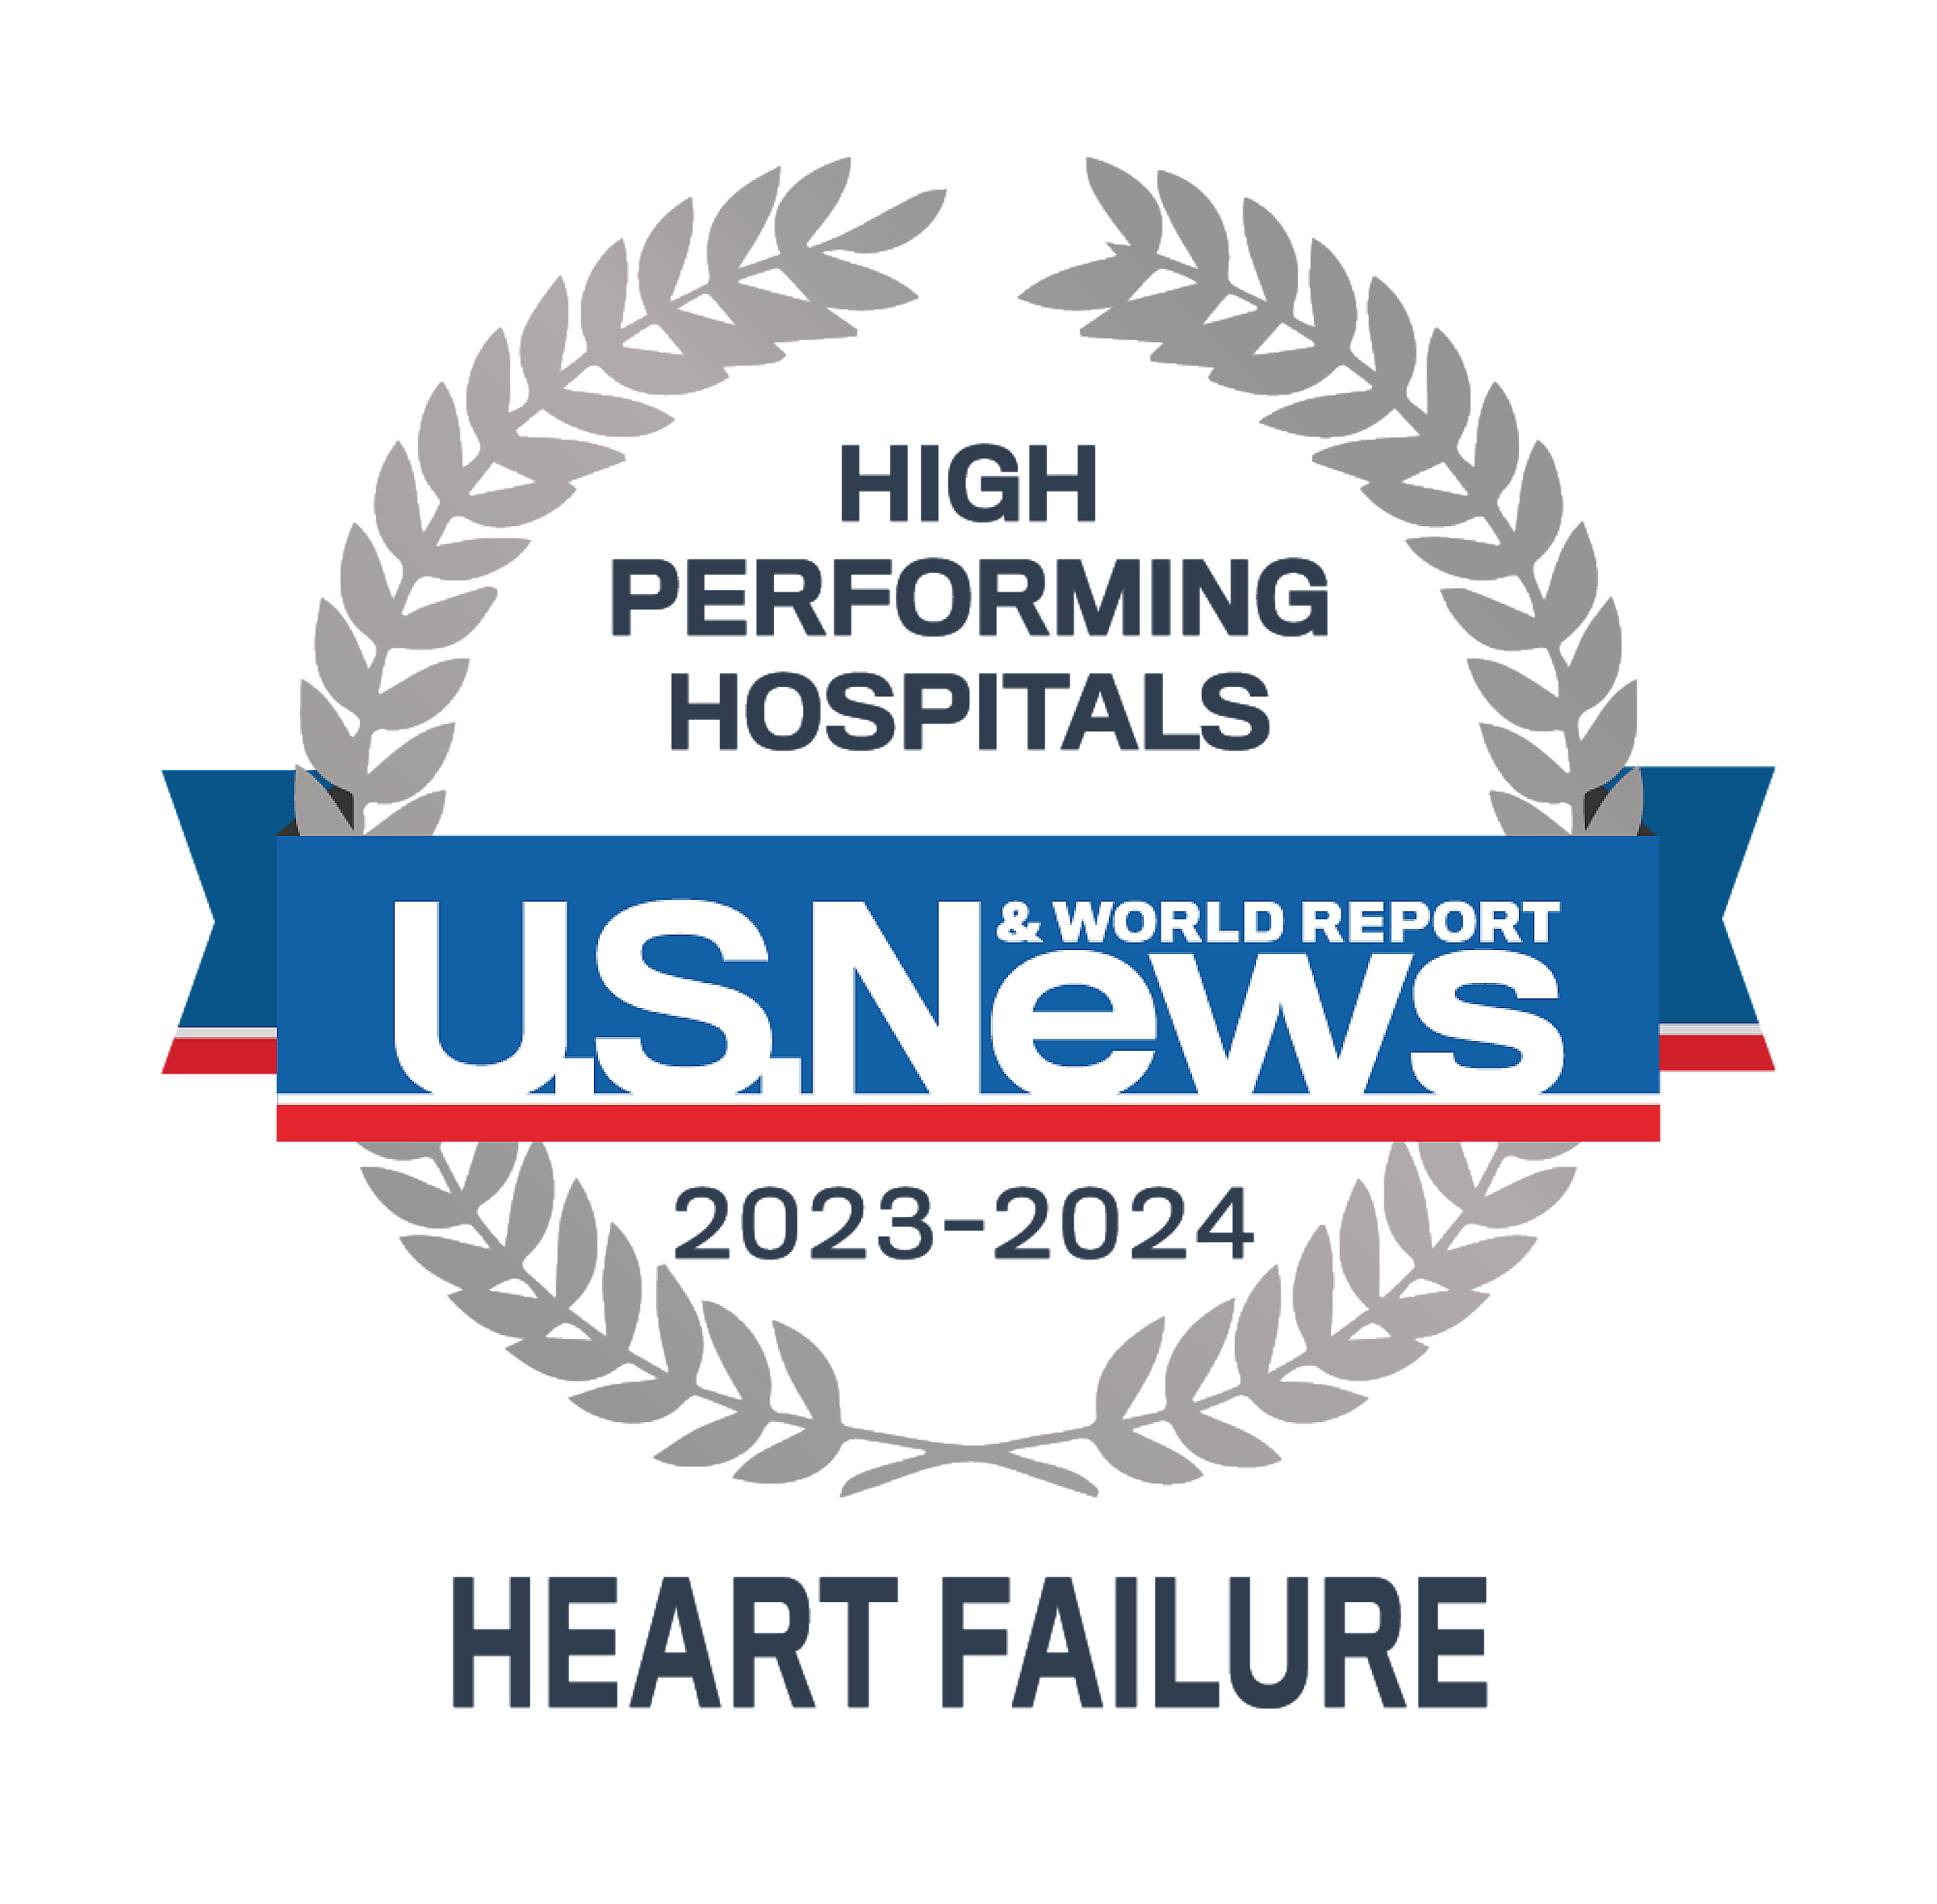 High performing treatment for heart failure treatment badge from US News & World Report 2022-2023